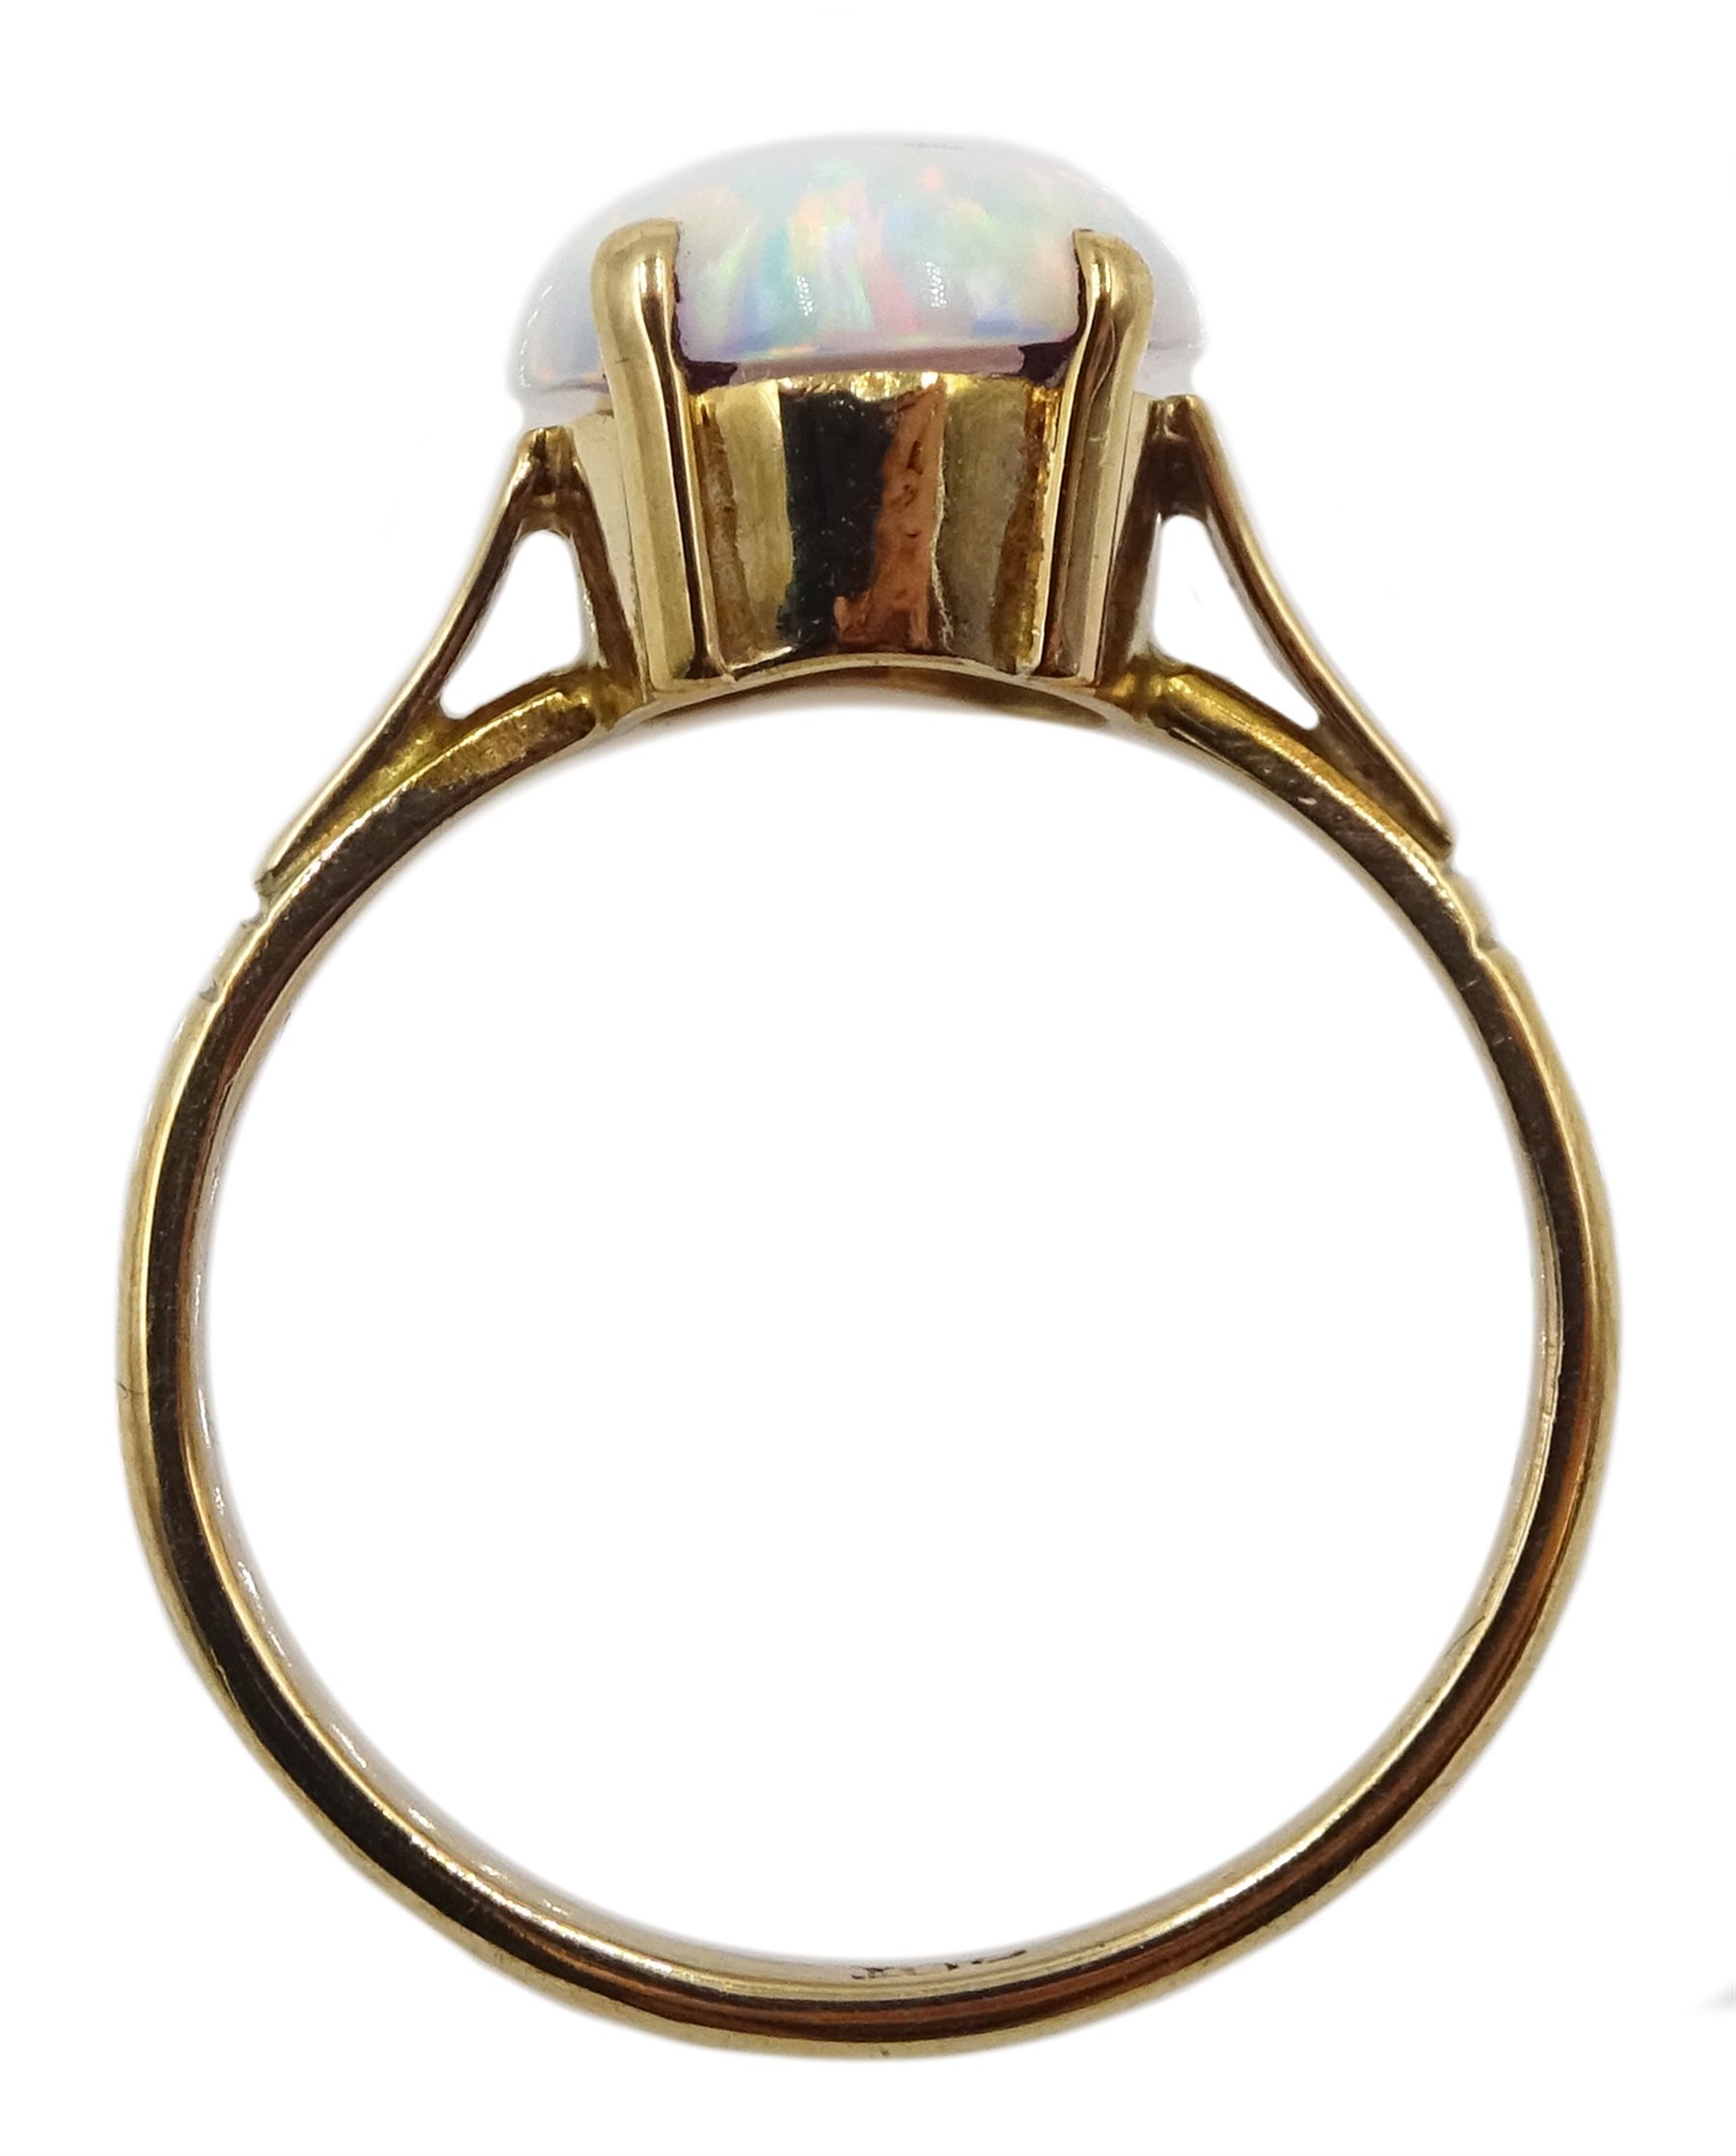 Gold oval opal ring, stamped 9ct - Image 3 of 3